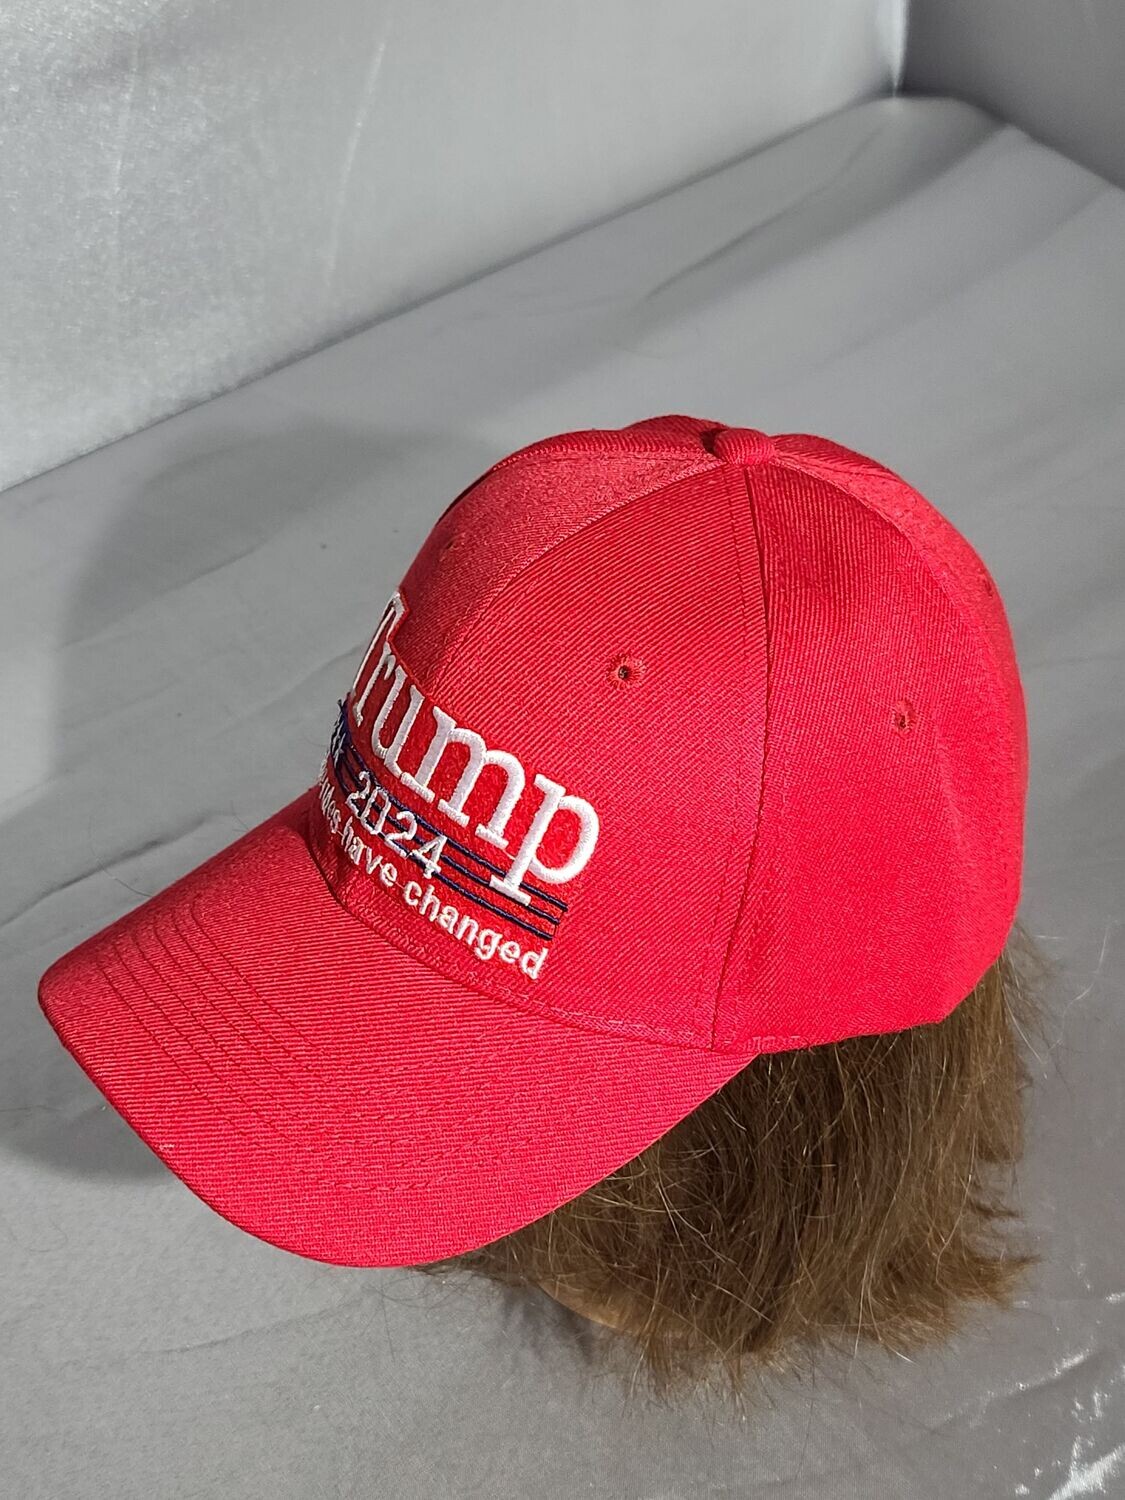 Trump 2024 rules changed hat